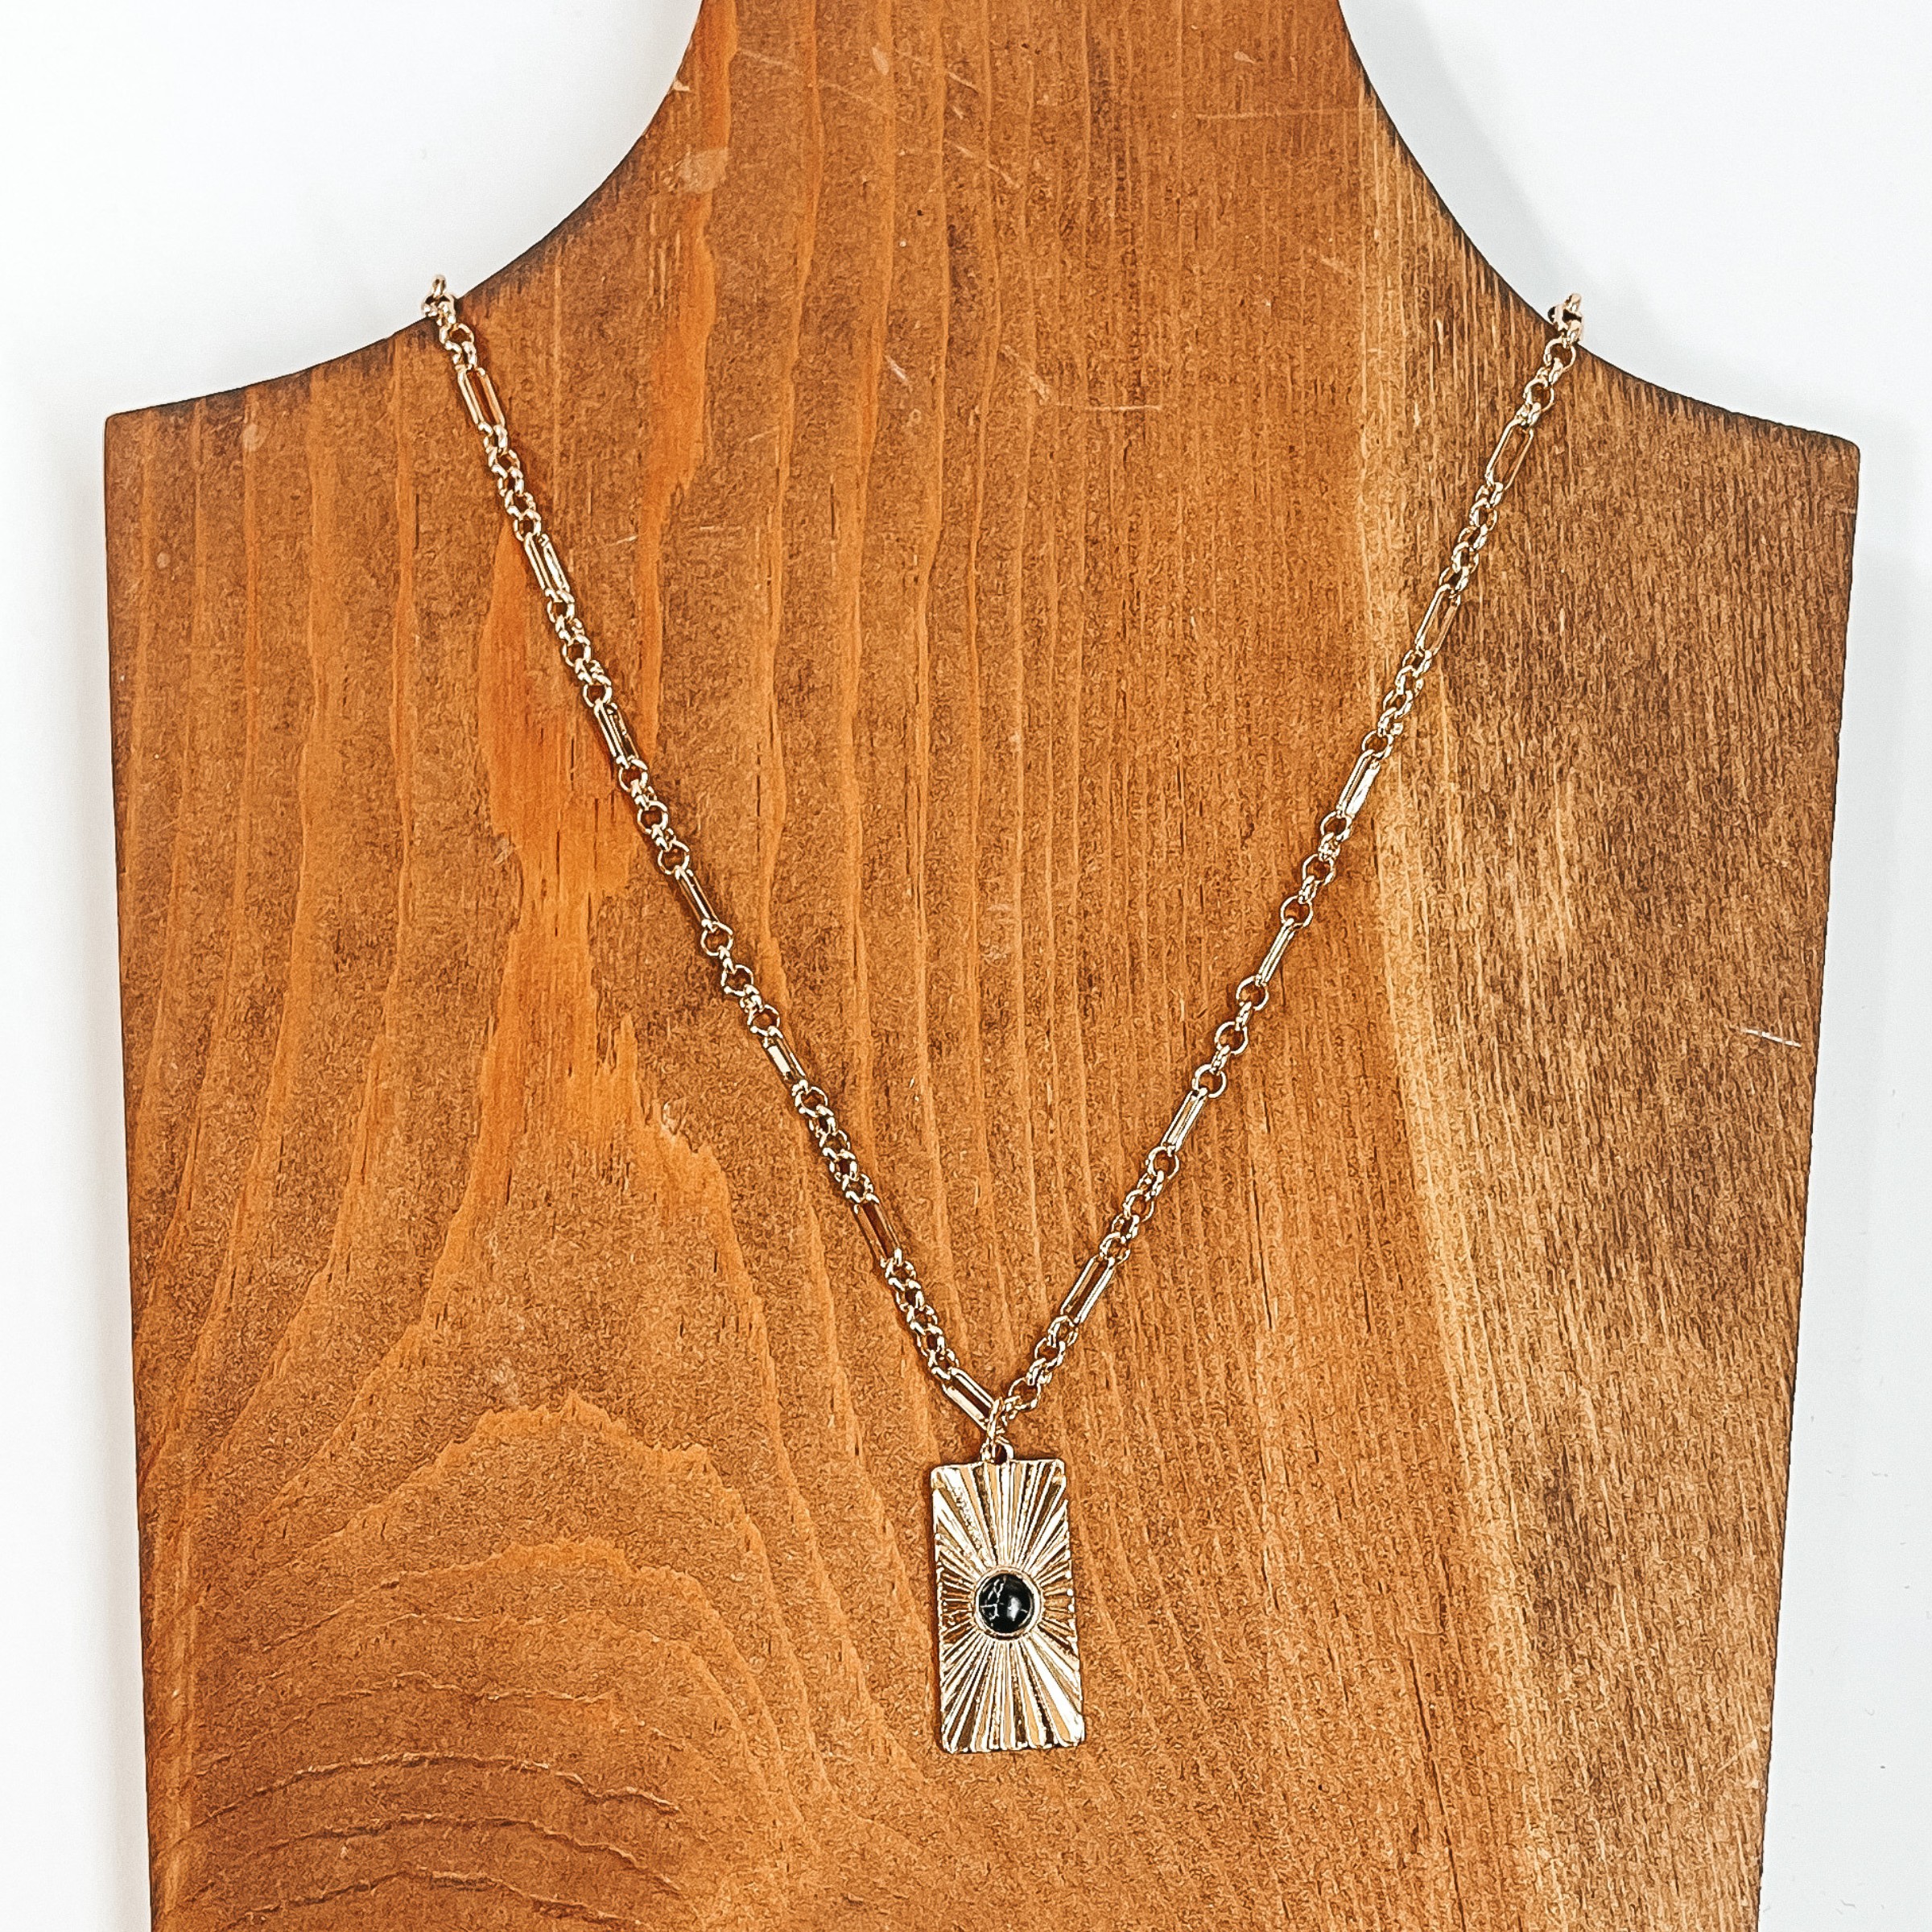 This is a gold chain necklace with a rectangle  pendant, the pendant has a sunburst texture and  a small stone in black. This necklace is  taken on  a brown necklace board and a white background.